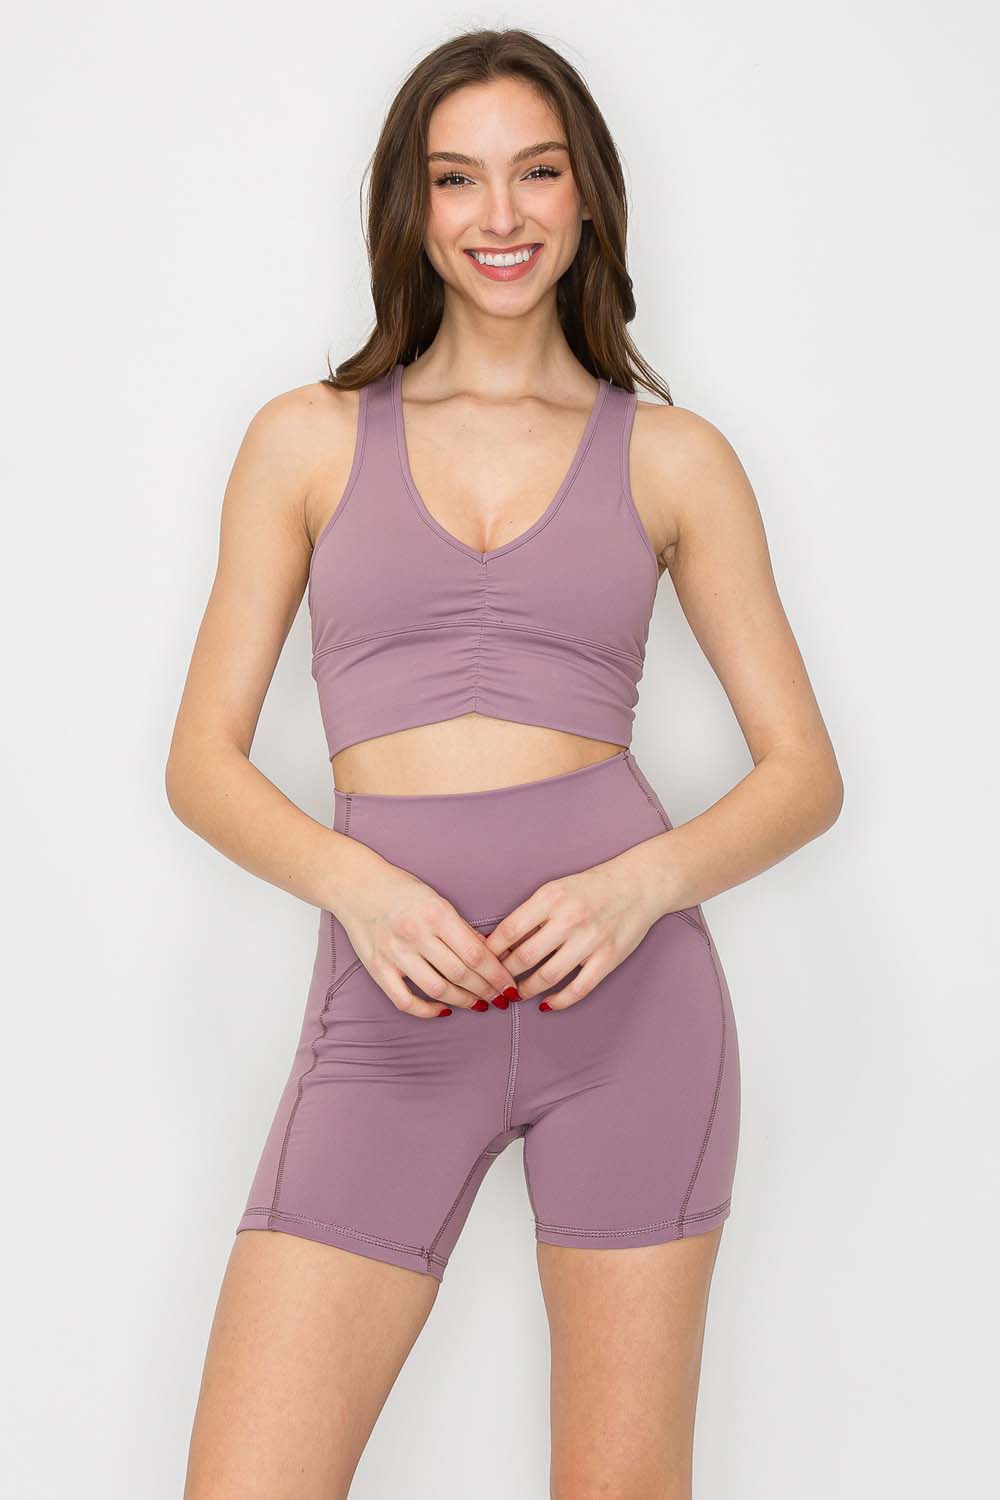 Ruched Bra Top - Medium Support - Ube Lavender - full body front